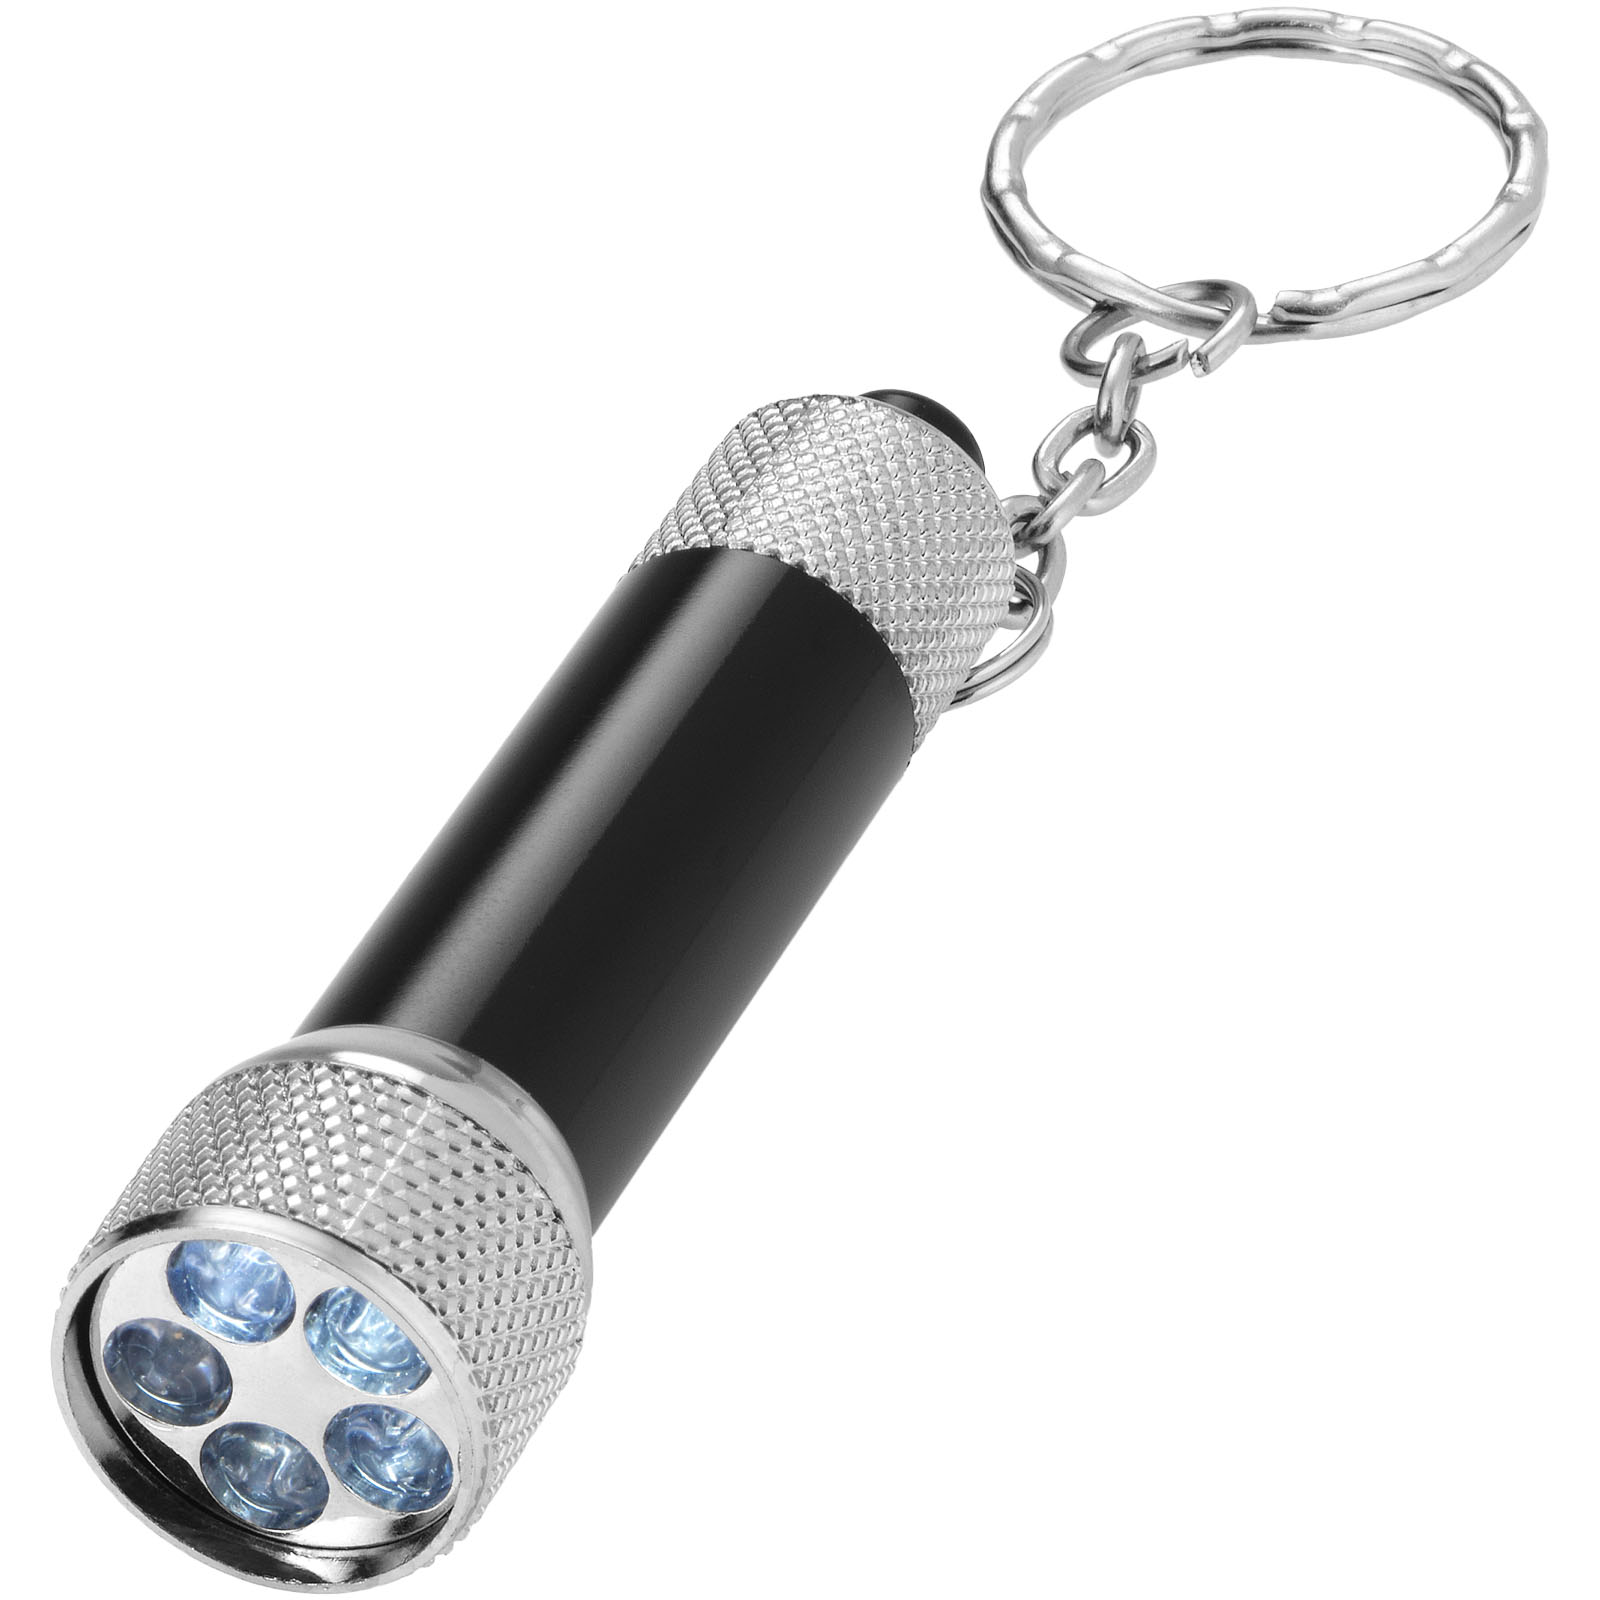 Tools & Car Accessories - Draco LED keychain light